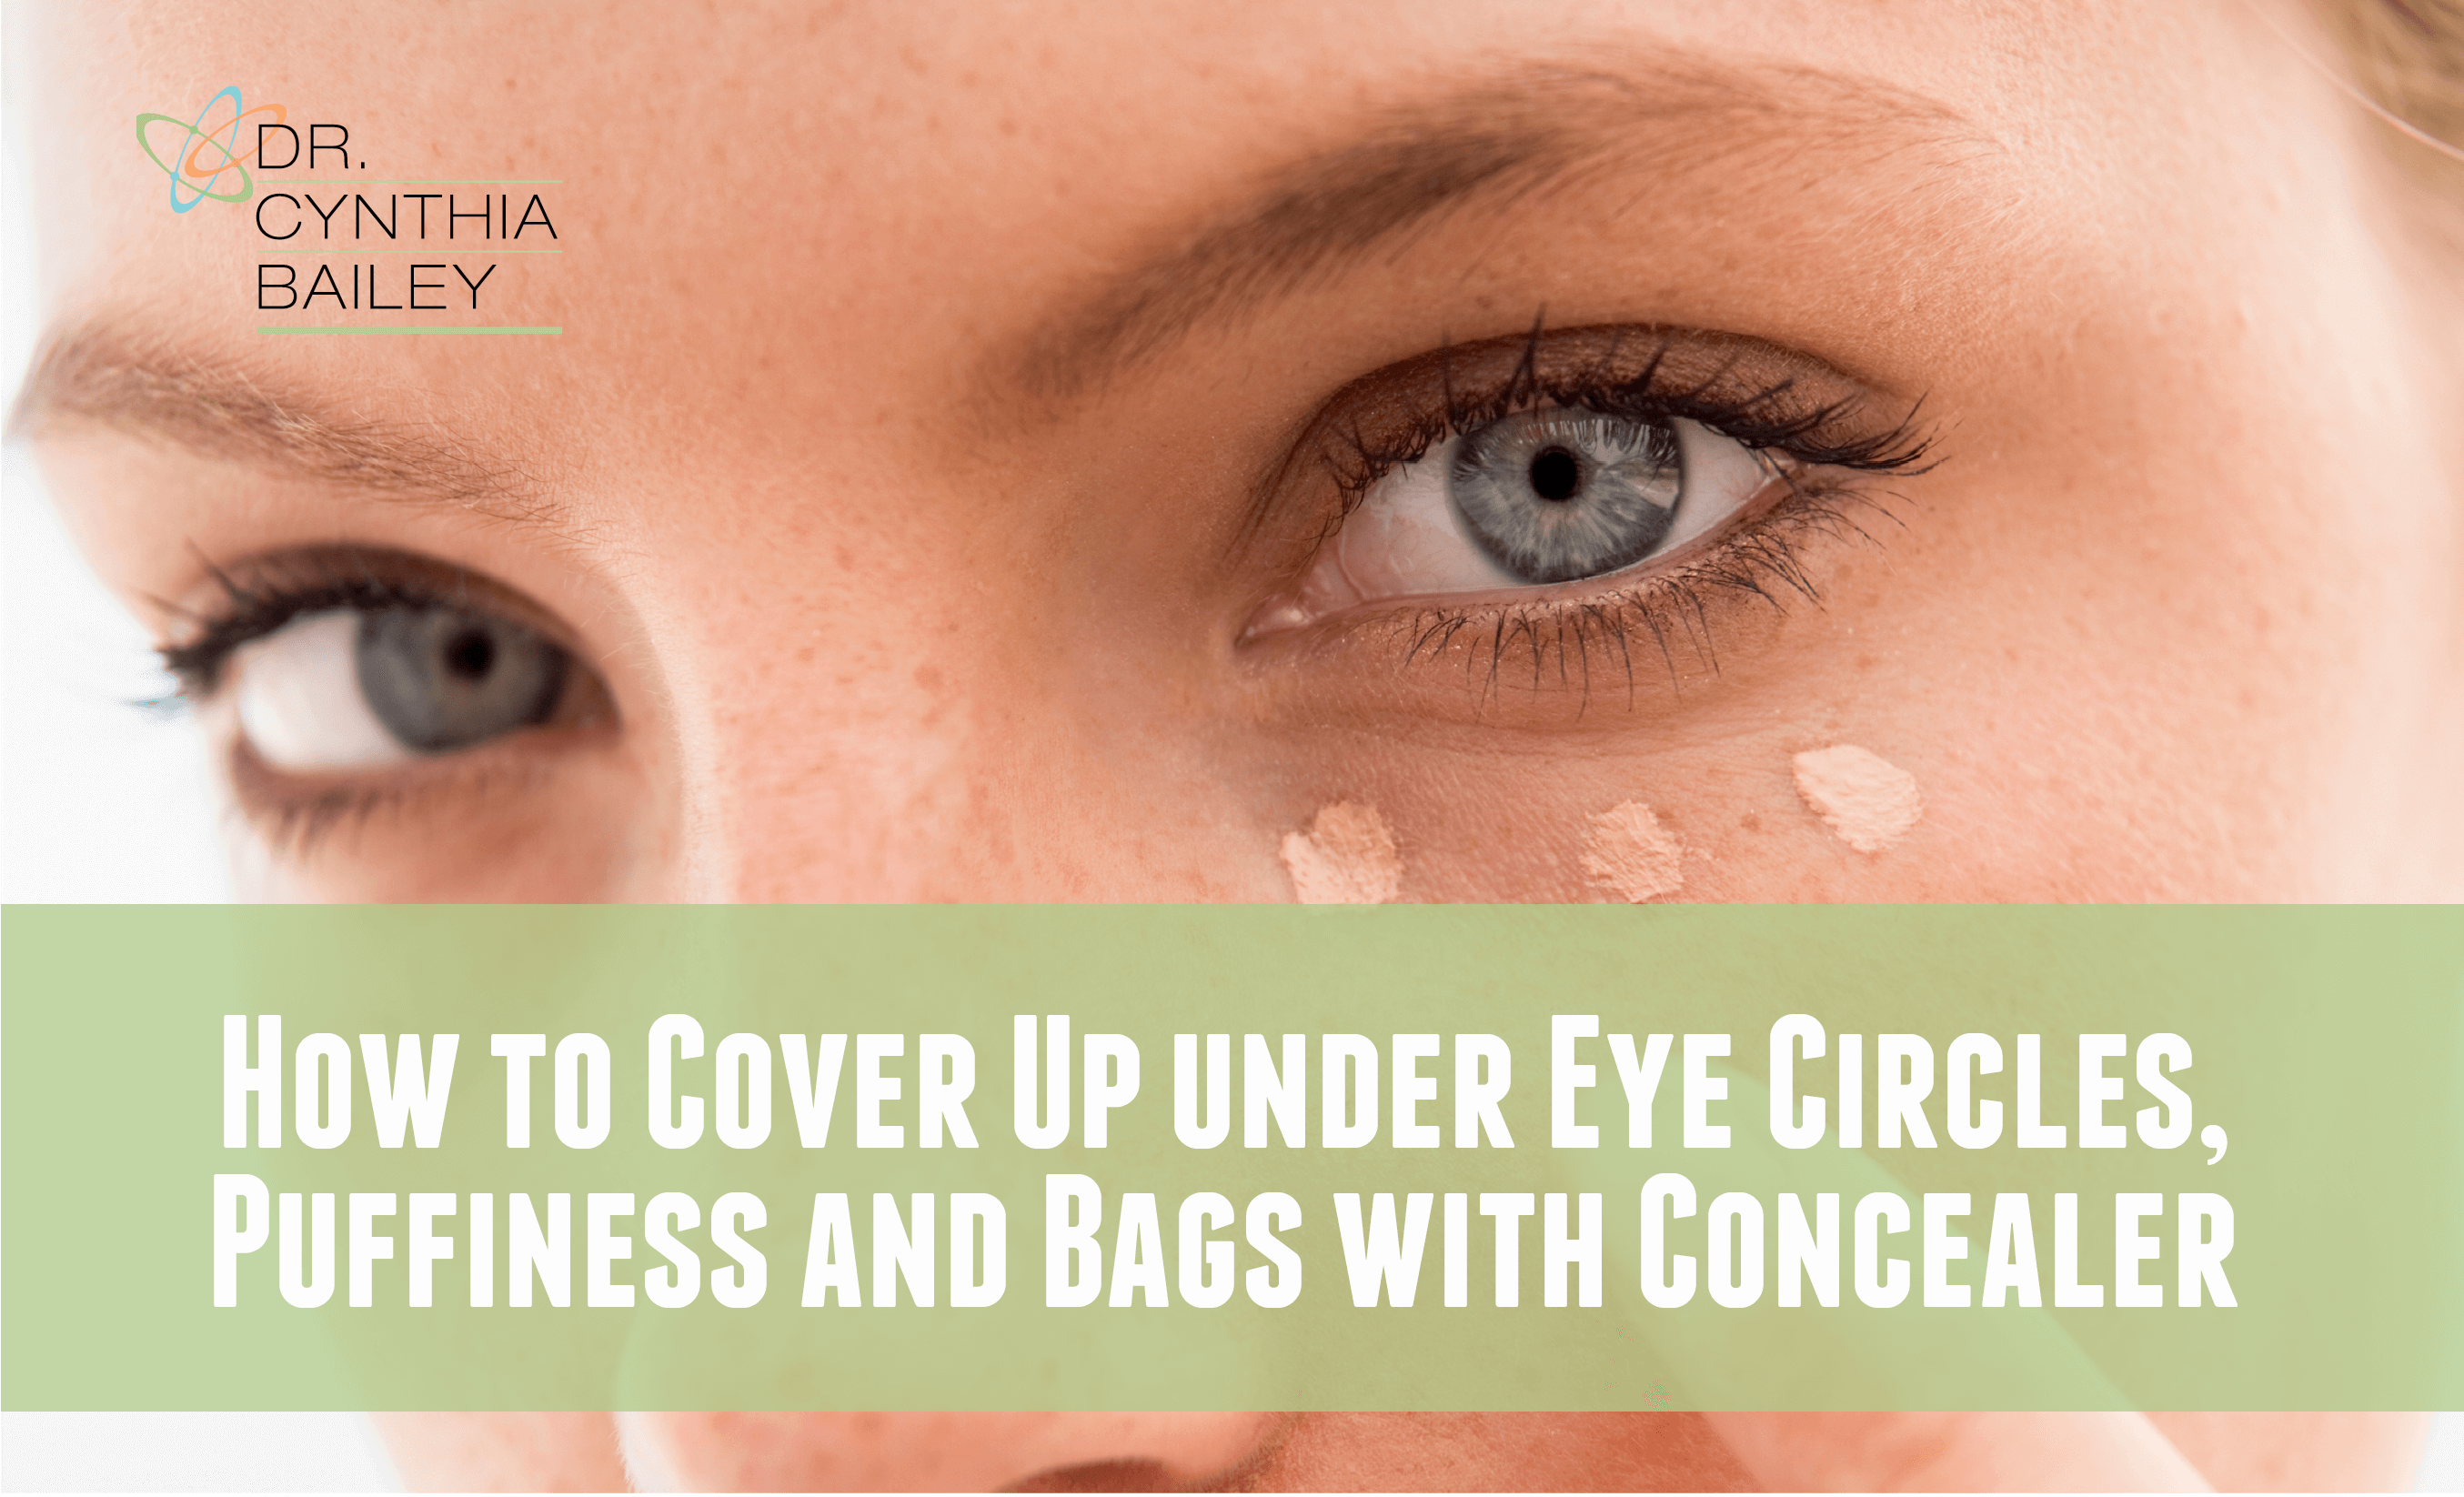 How To Cover Dark Circles, How To